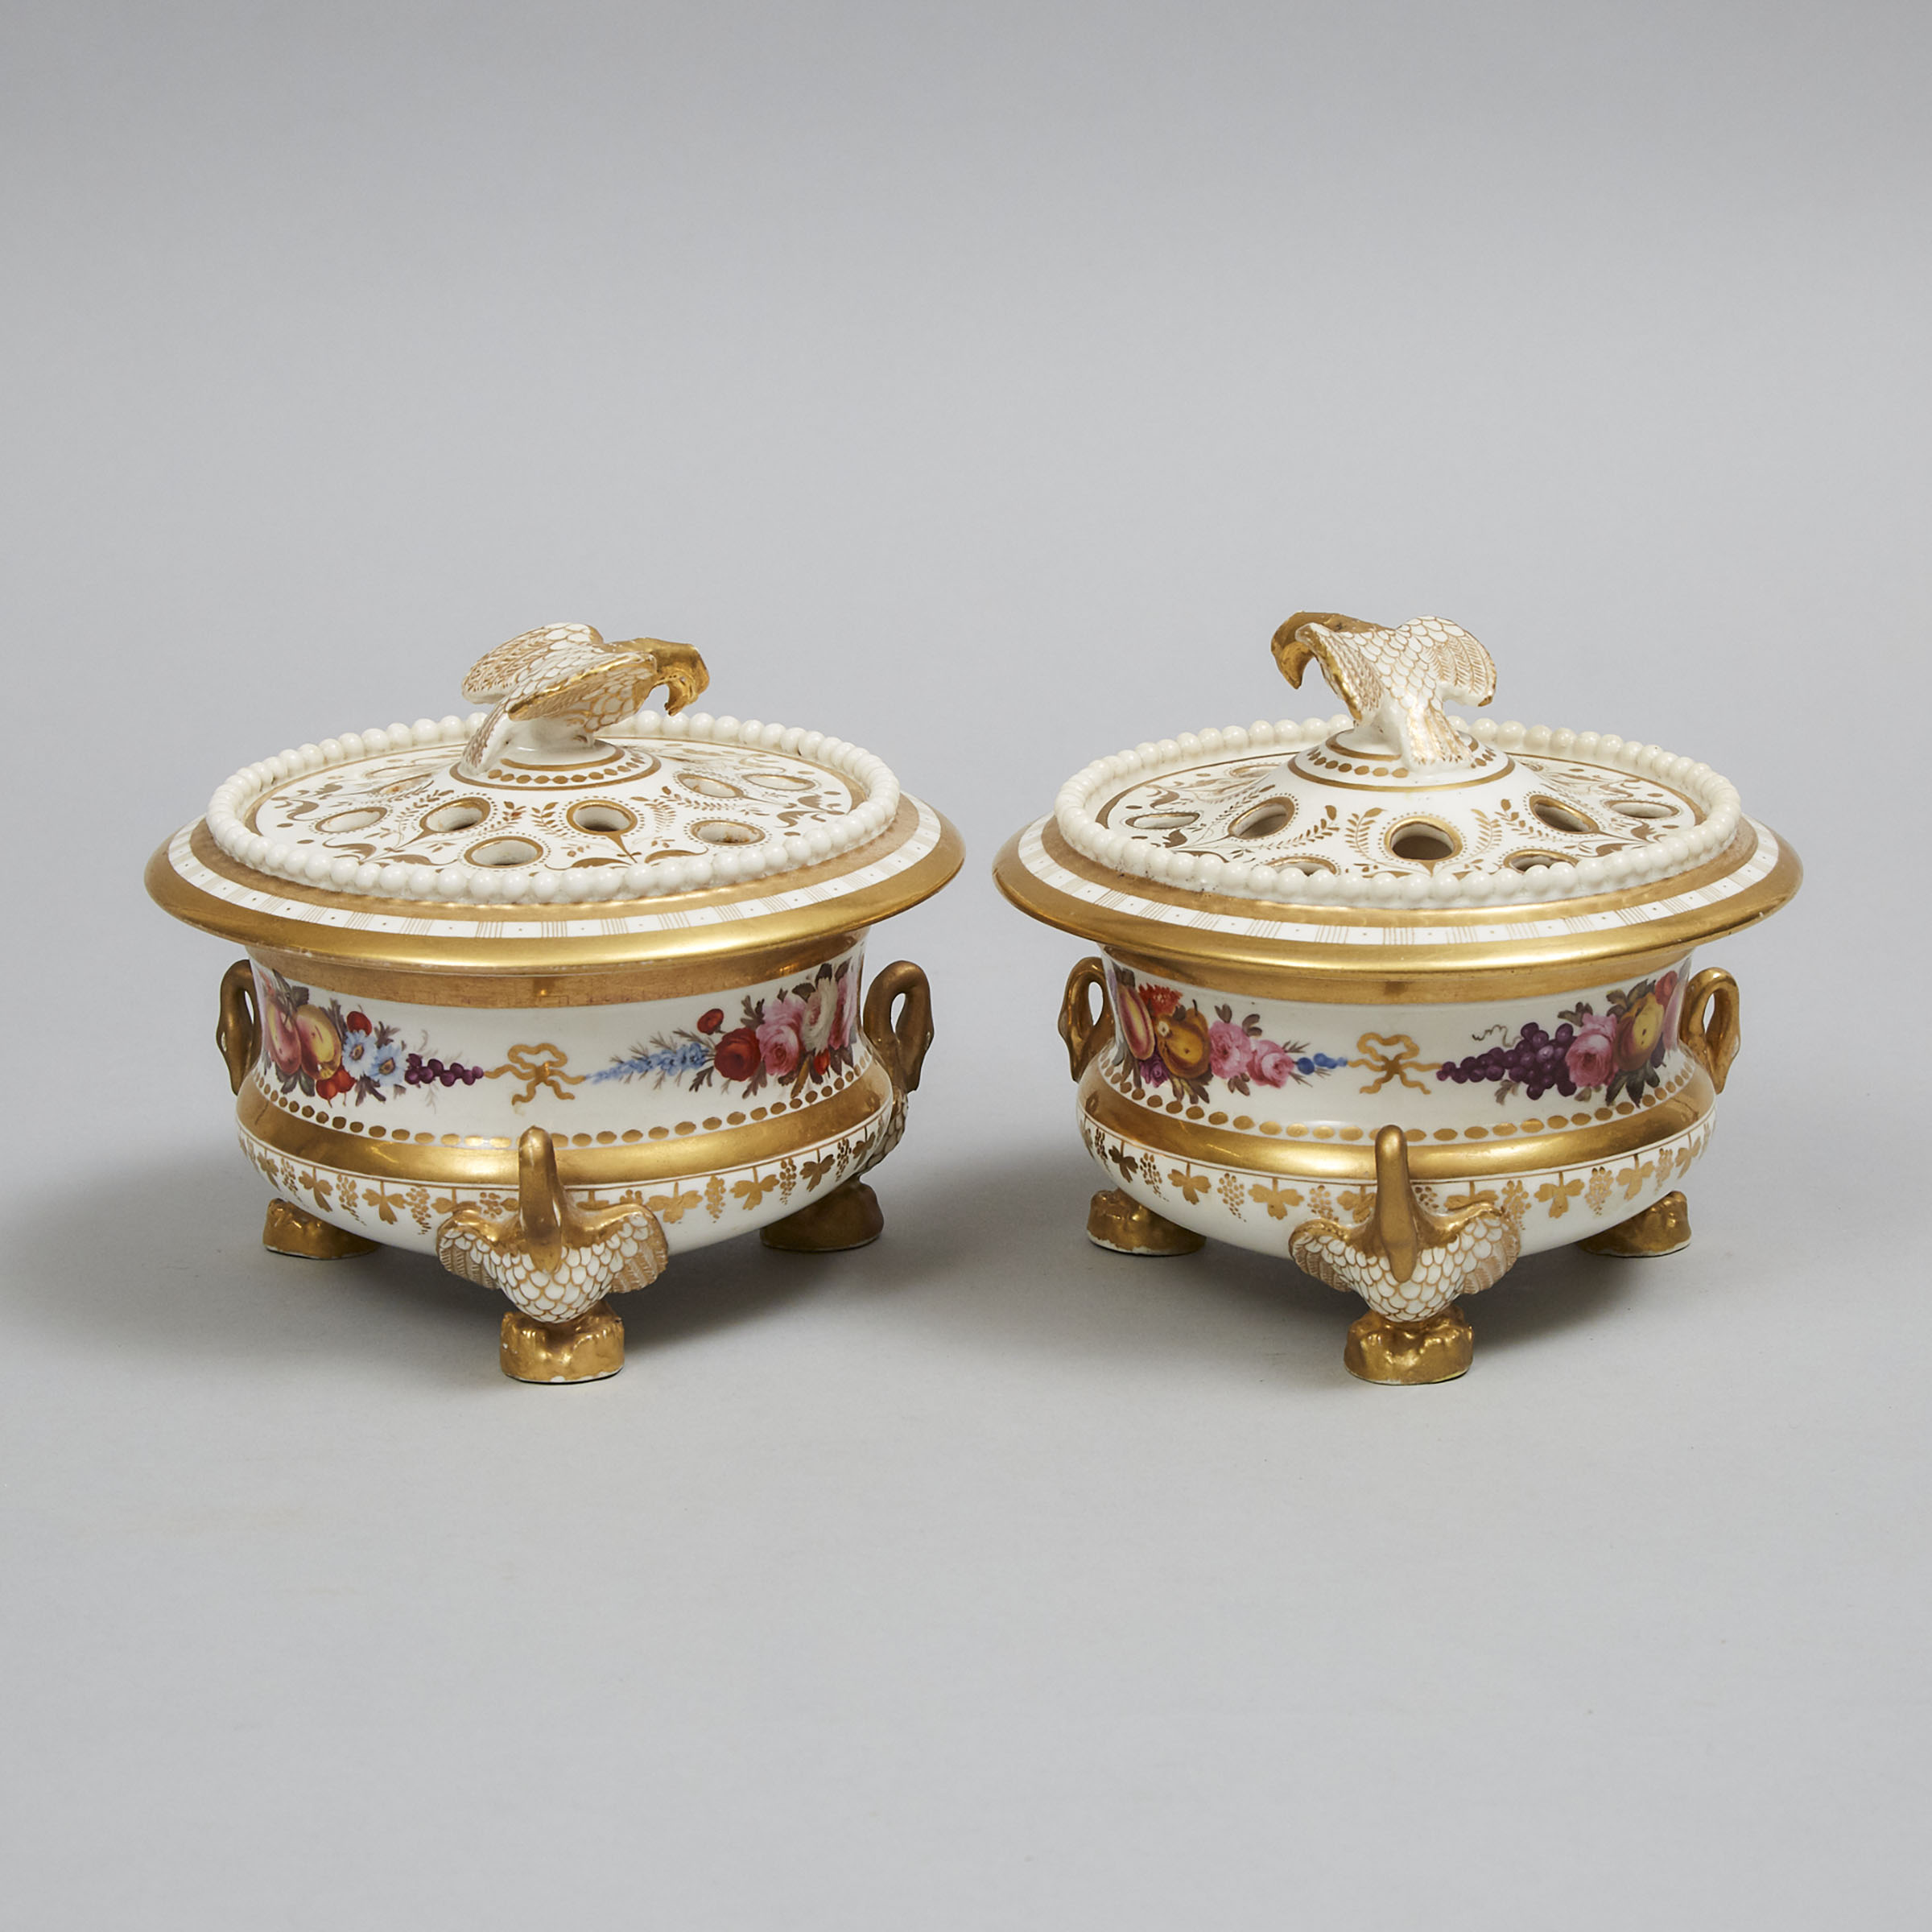 Pair of English Porcelain Potpourri Vases with Covers, c.1820